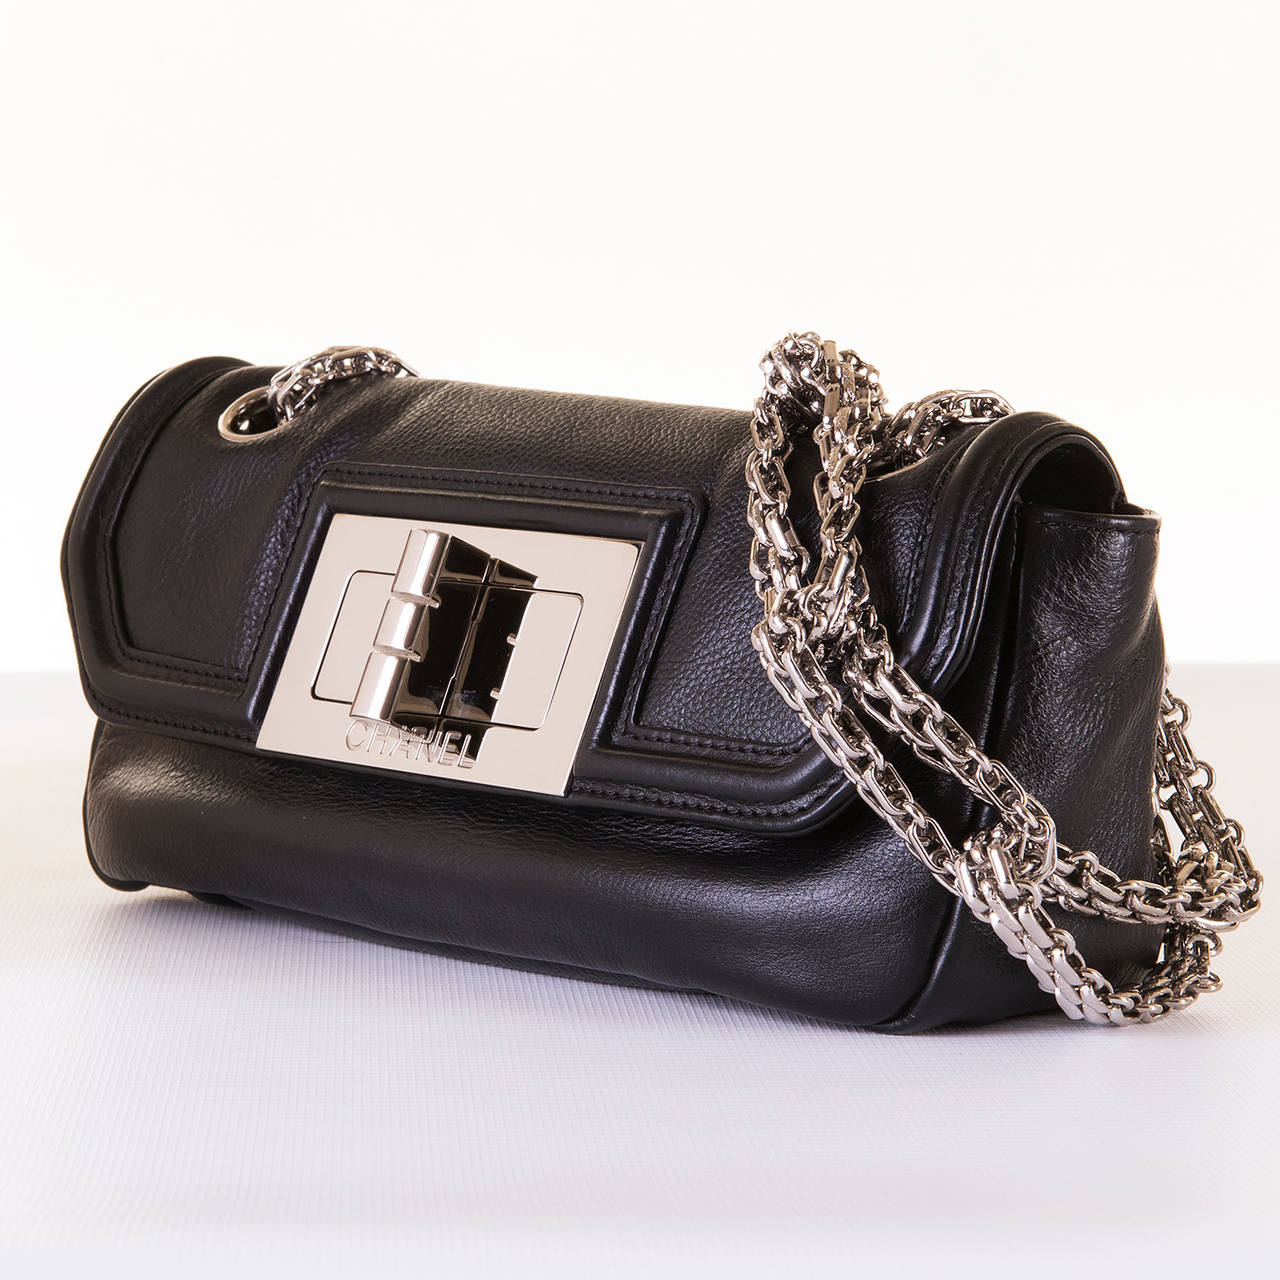 Women's 'TRES CHIC' Chanel  Black 'Sac Baguette' with Silver Palladium Hardware